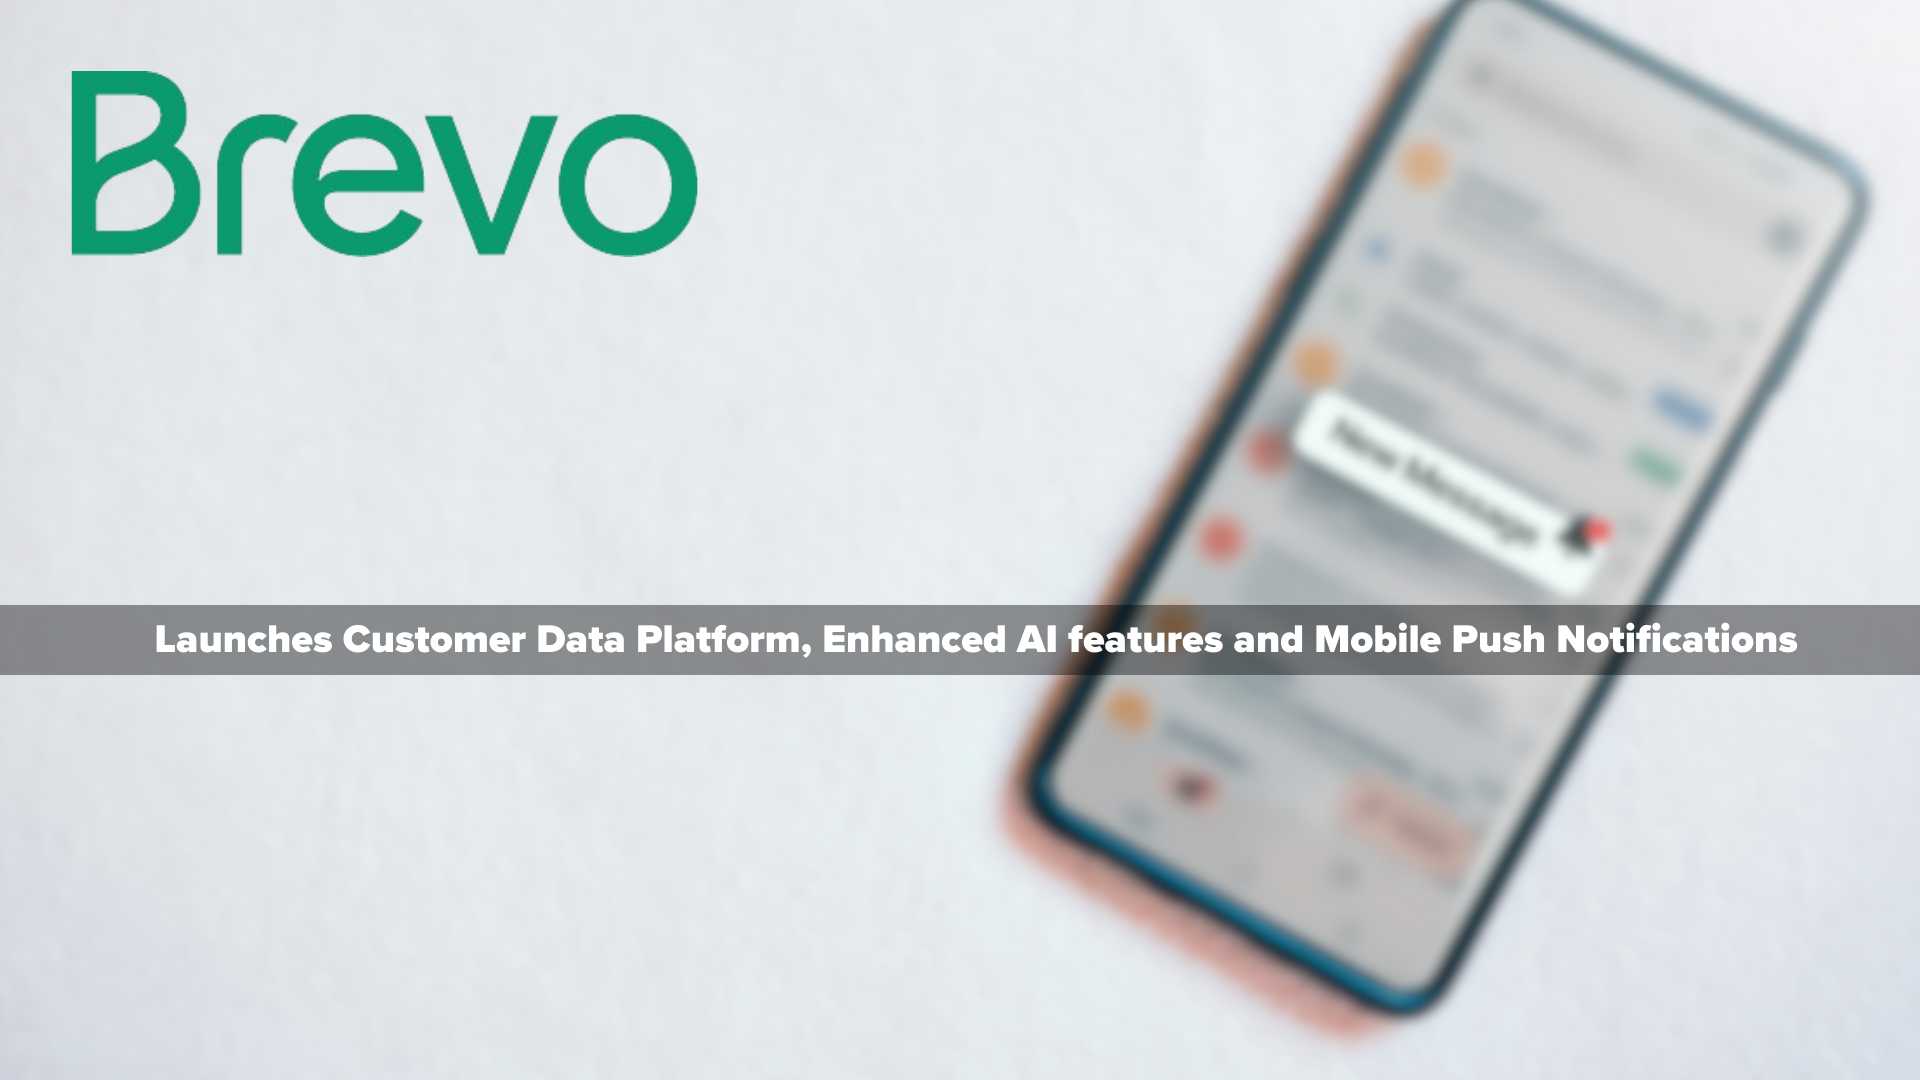 Brevo Launches Customer Data Platform, Enhanced AI features and Mobile Push Notifications